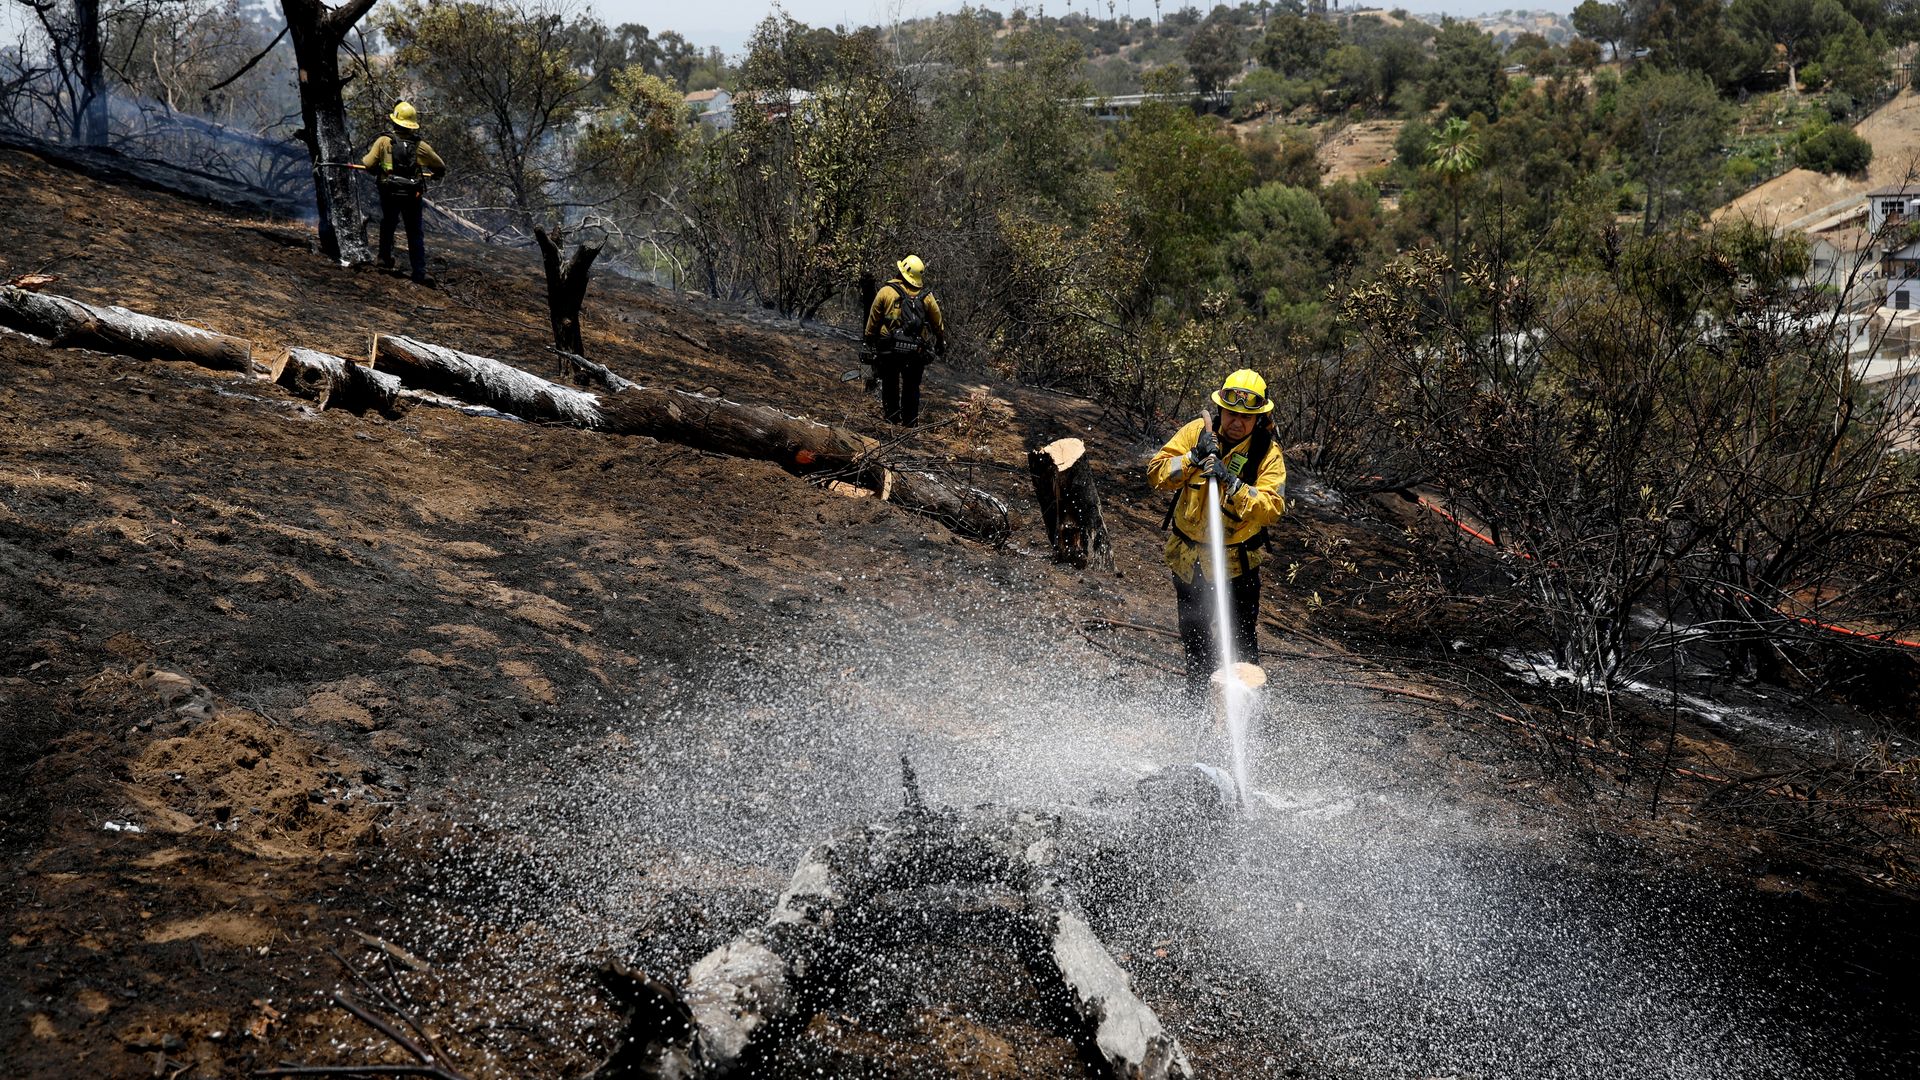 Los Angeles Fire Department mops up a brush fire in Elysian Park on Wednesday, June 16, 2021